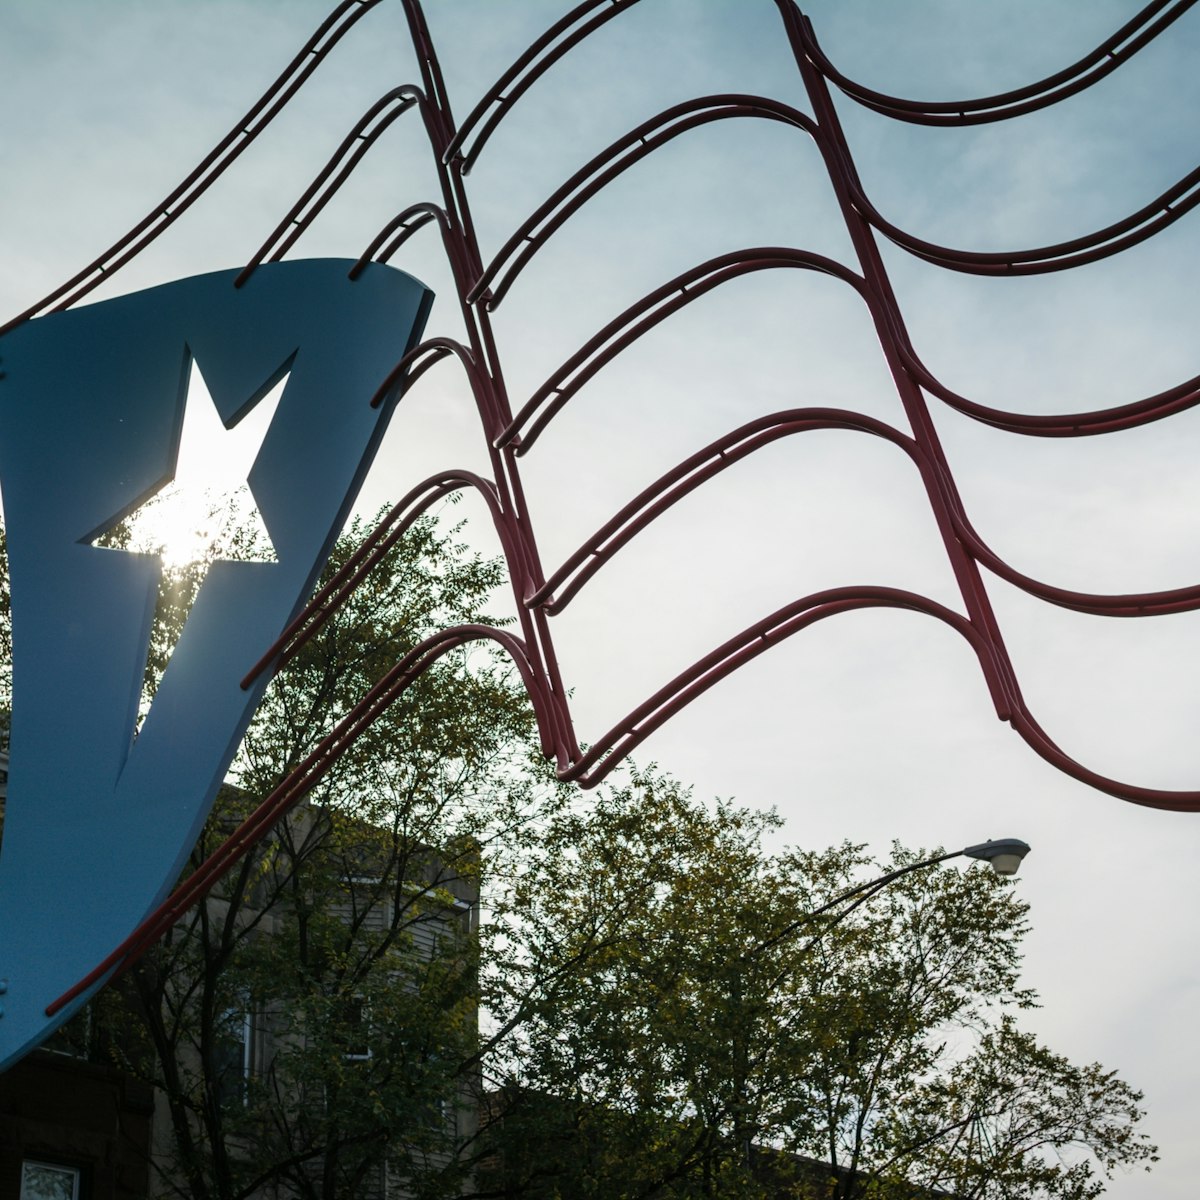 500px Photo ID: 89361423 - The Puertorican flag is the center of attraction at Paseo Boricua on Division Street in Chicago, Il. The section known as Humboldt Park has a large concentration of Puertorican families living in it.